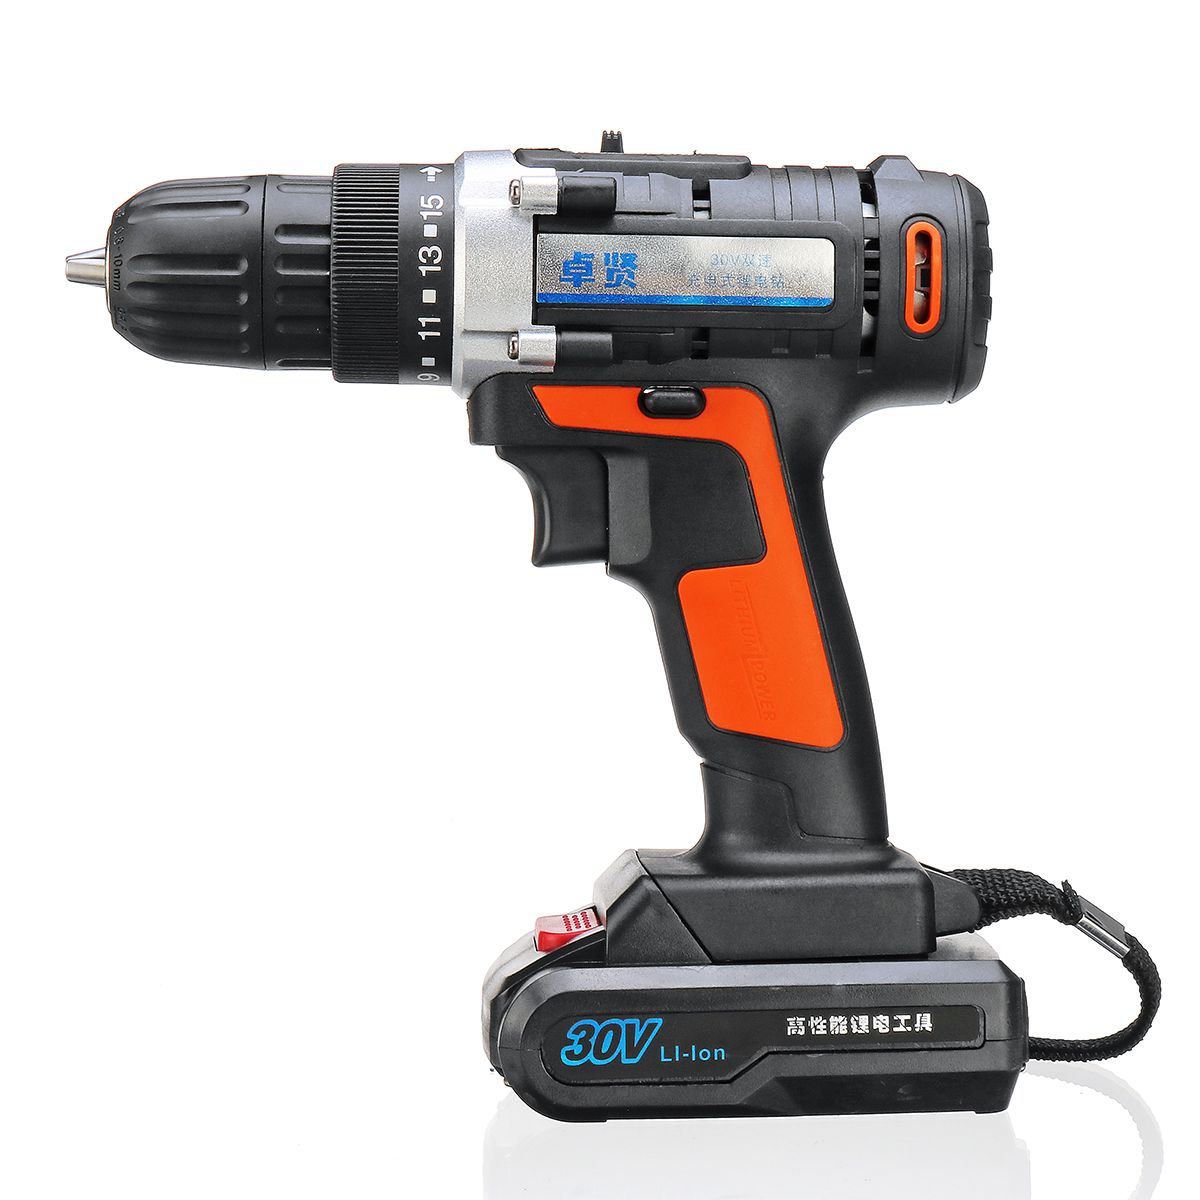 30V-Cordless-Rechargeable-Power-Drill-Driver-Electric-Screwdriver-with-2-Li-ion-Batteries-1393459